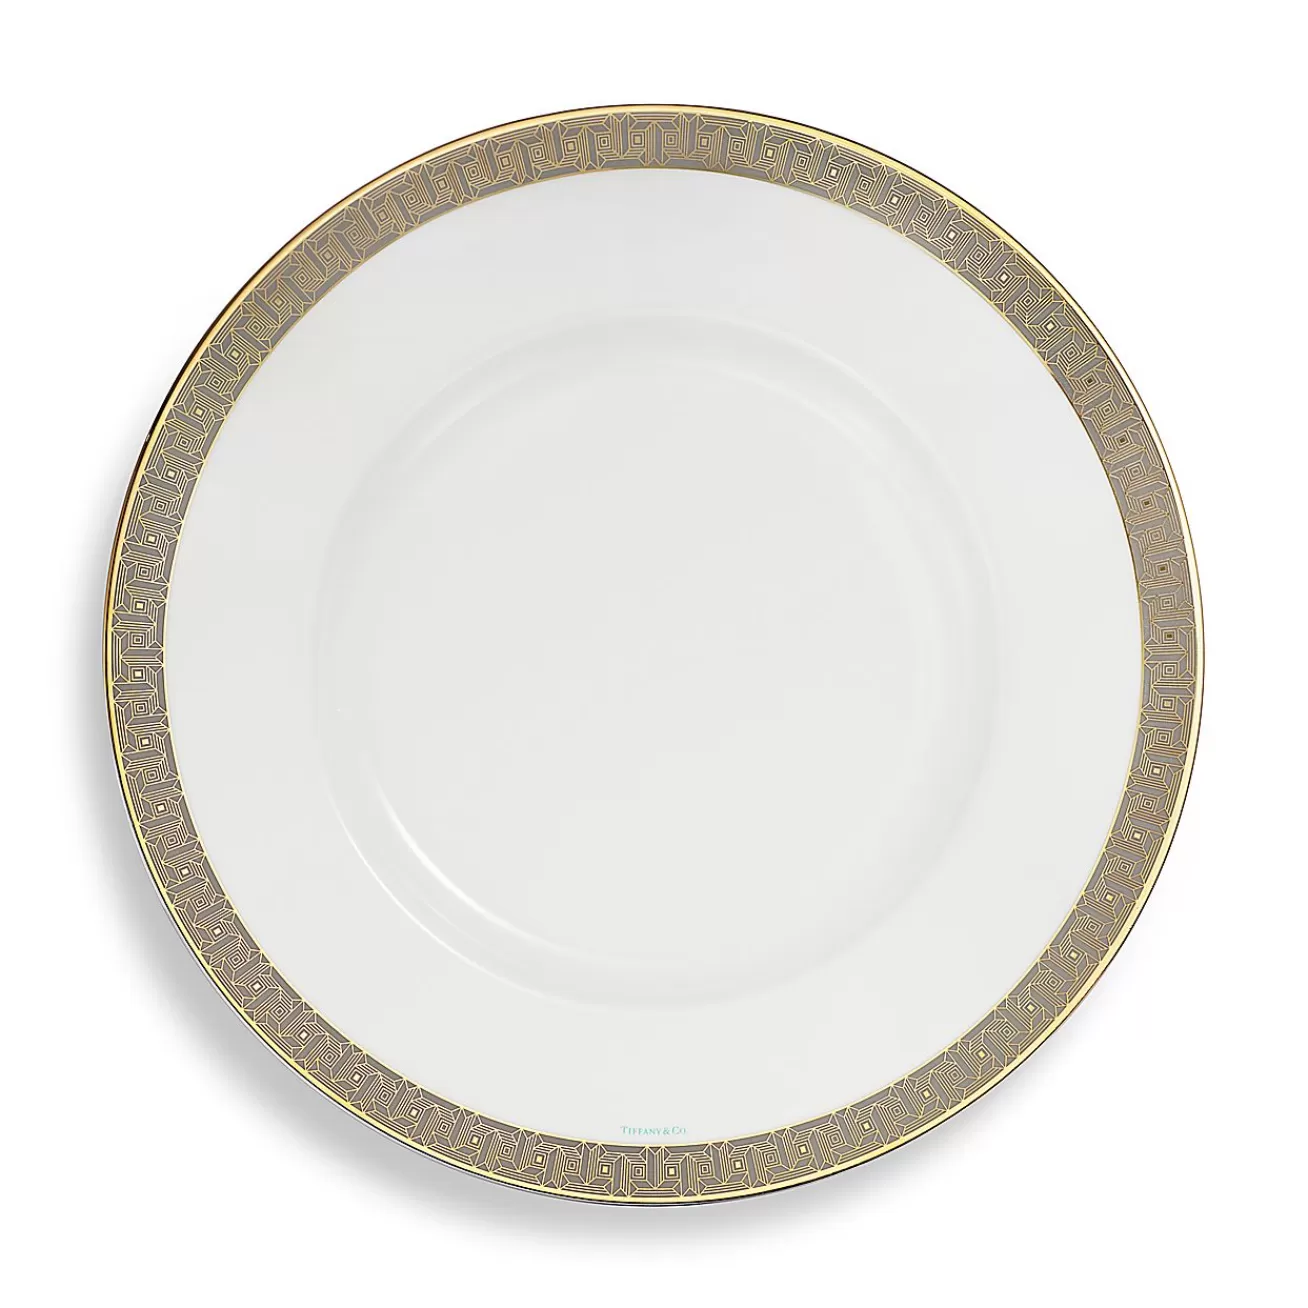 Tiffany & Co. Tiffany T True Charger with a Hand-painted Gold Rim | ^ The Home | Housewarming Gifts